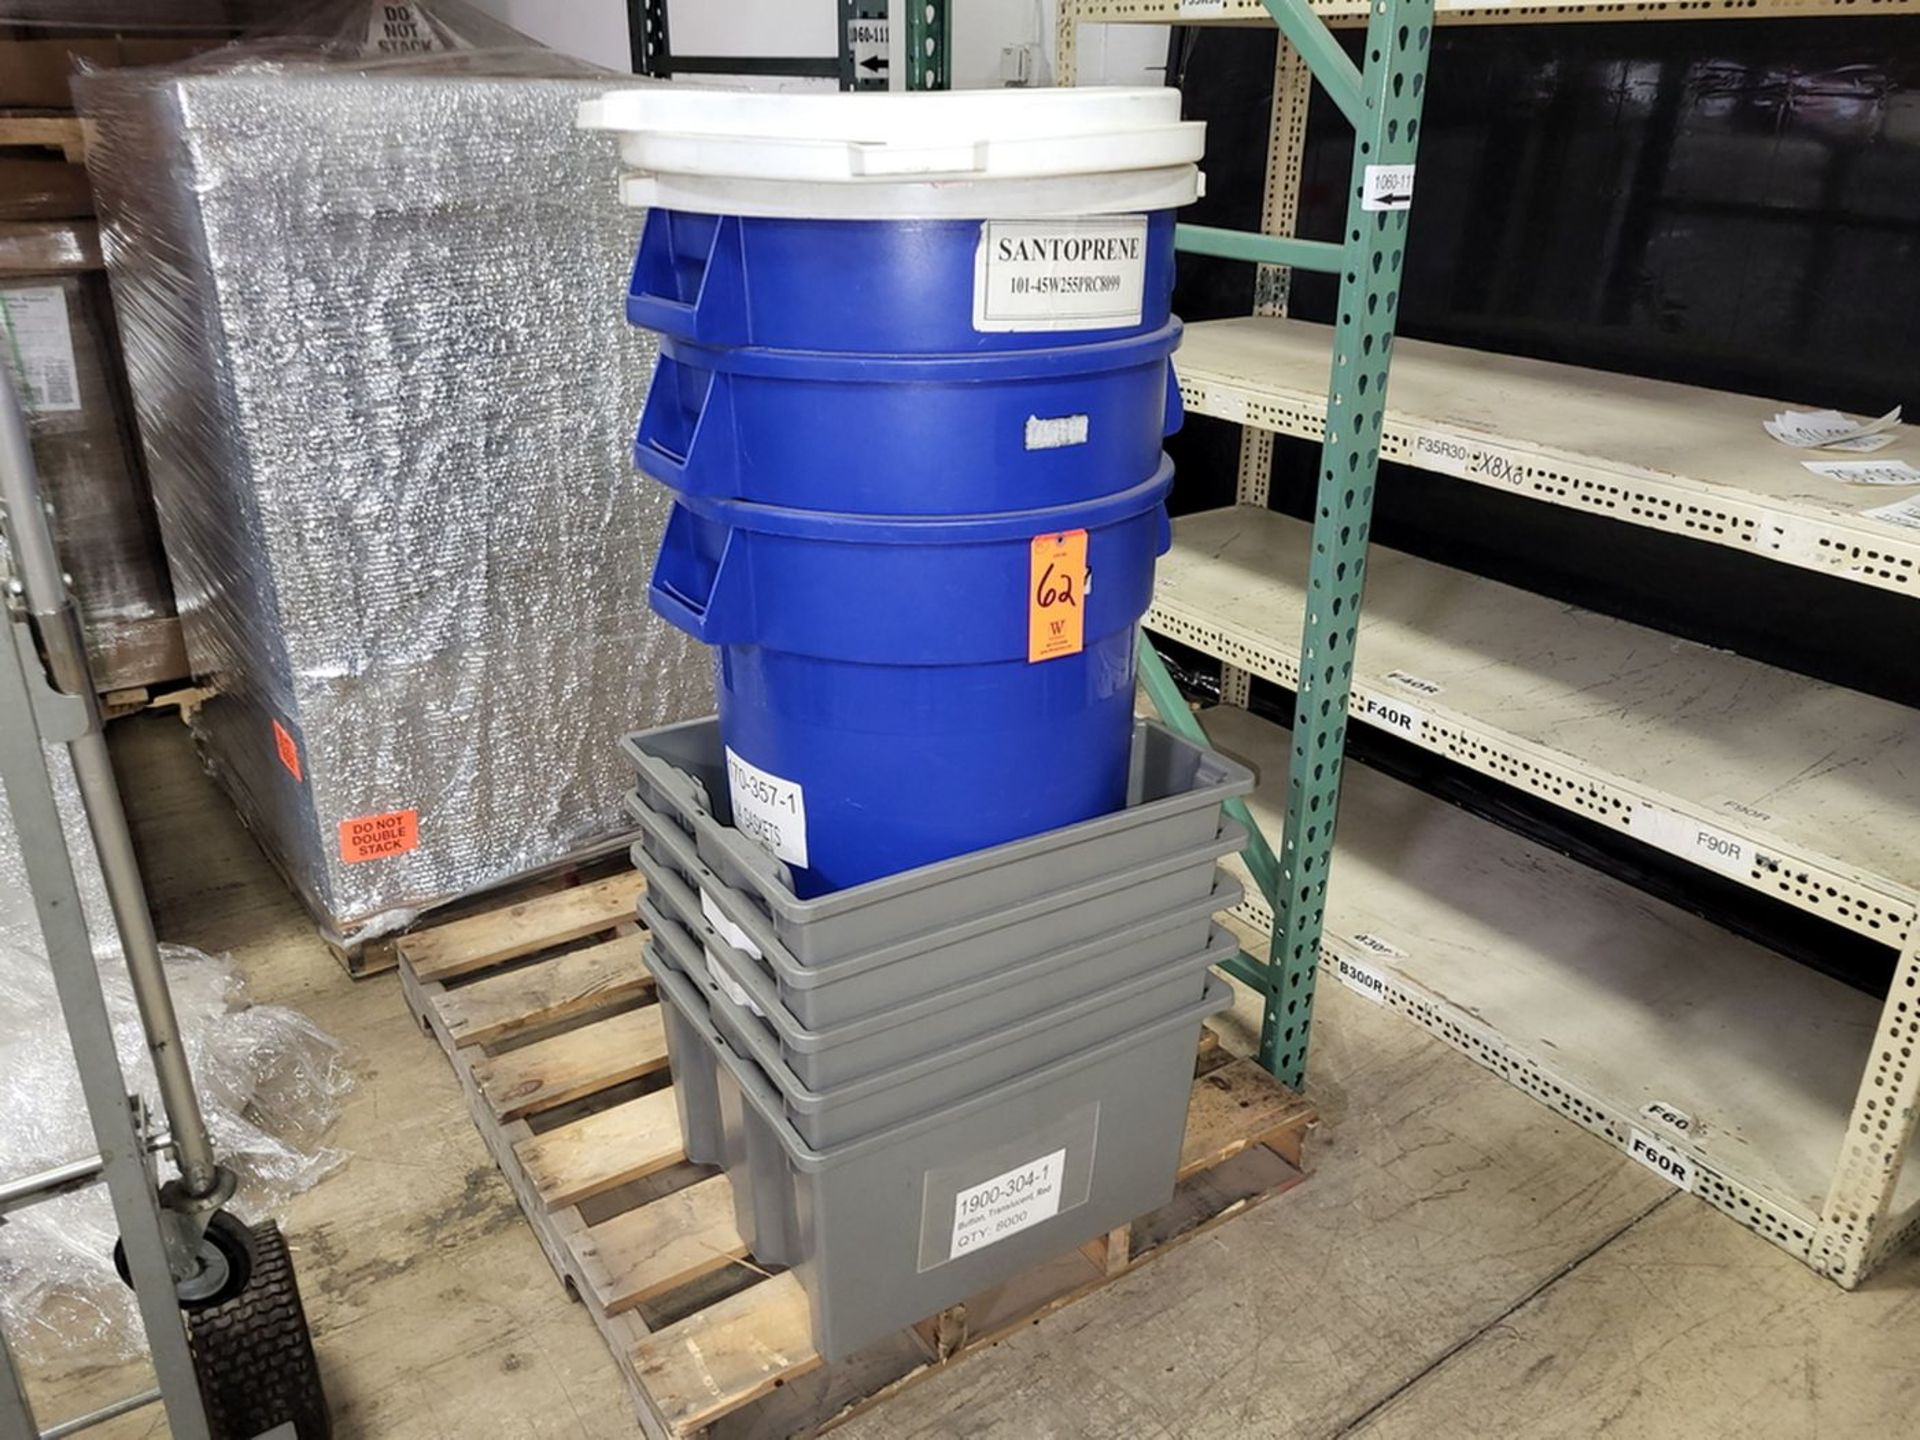 Lot - (8) Assorted Bins; to Include: (3) Uline 32-Gallon Waste Containers with Lids, and (5) Plastic